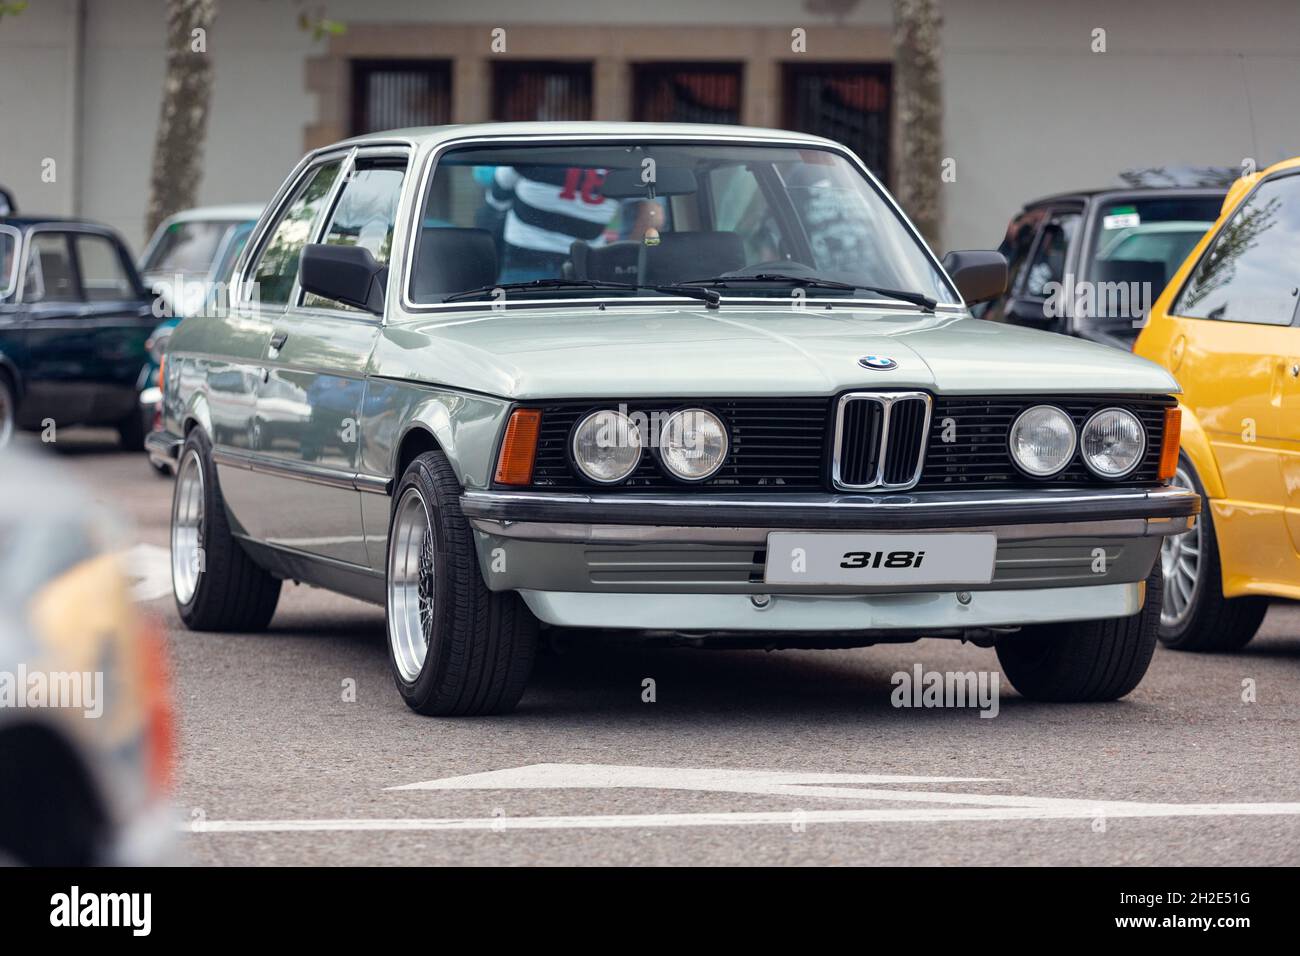 Reocin, Cantabria, Spain - October 2, 2021: Car show exhibition in Reocin. The BMW 3 series E21 was a BMW-designed passenger car. In 1975, BMW decided Stock Photo